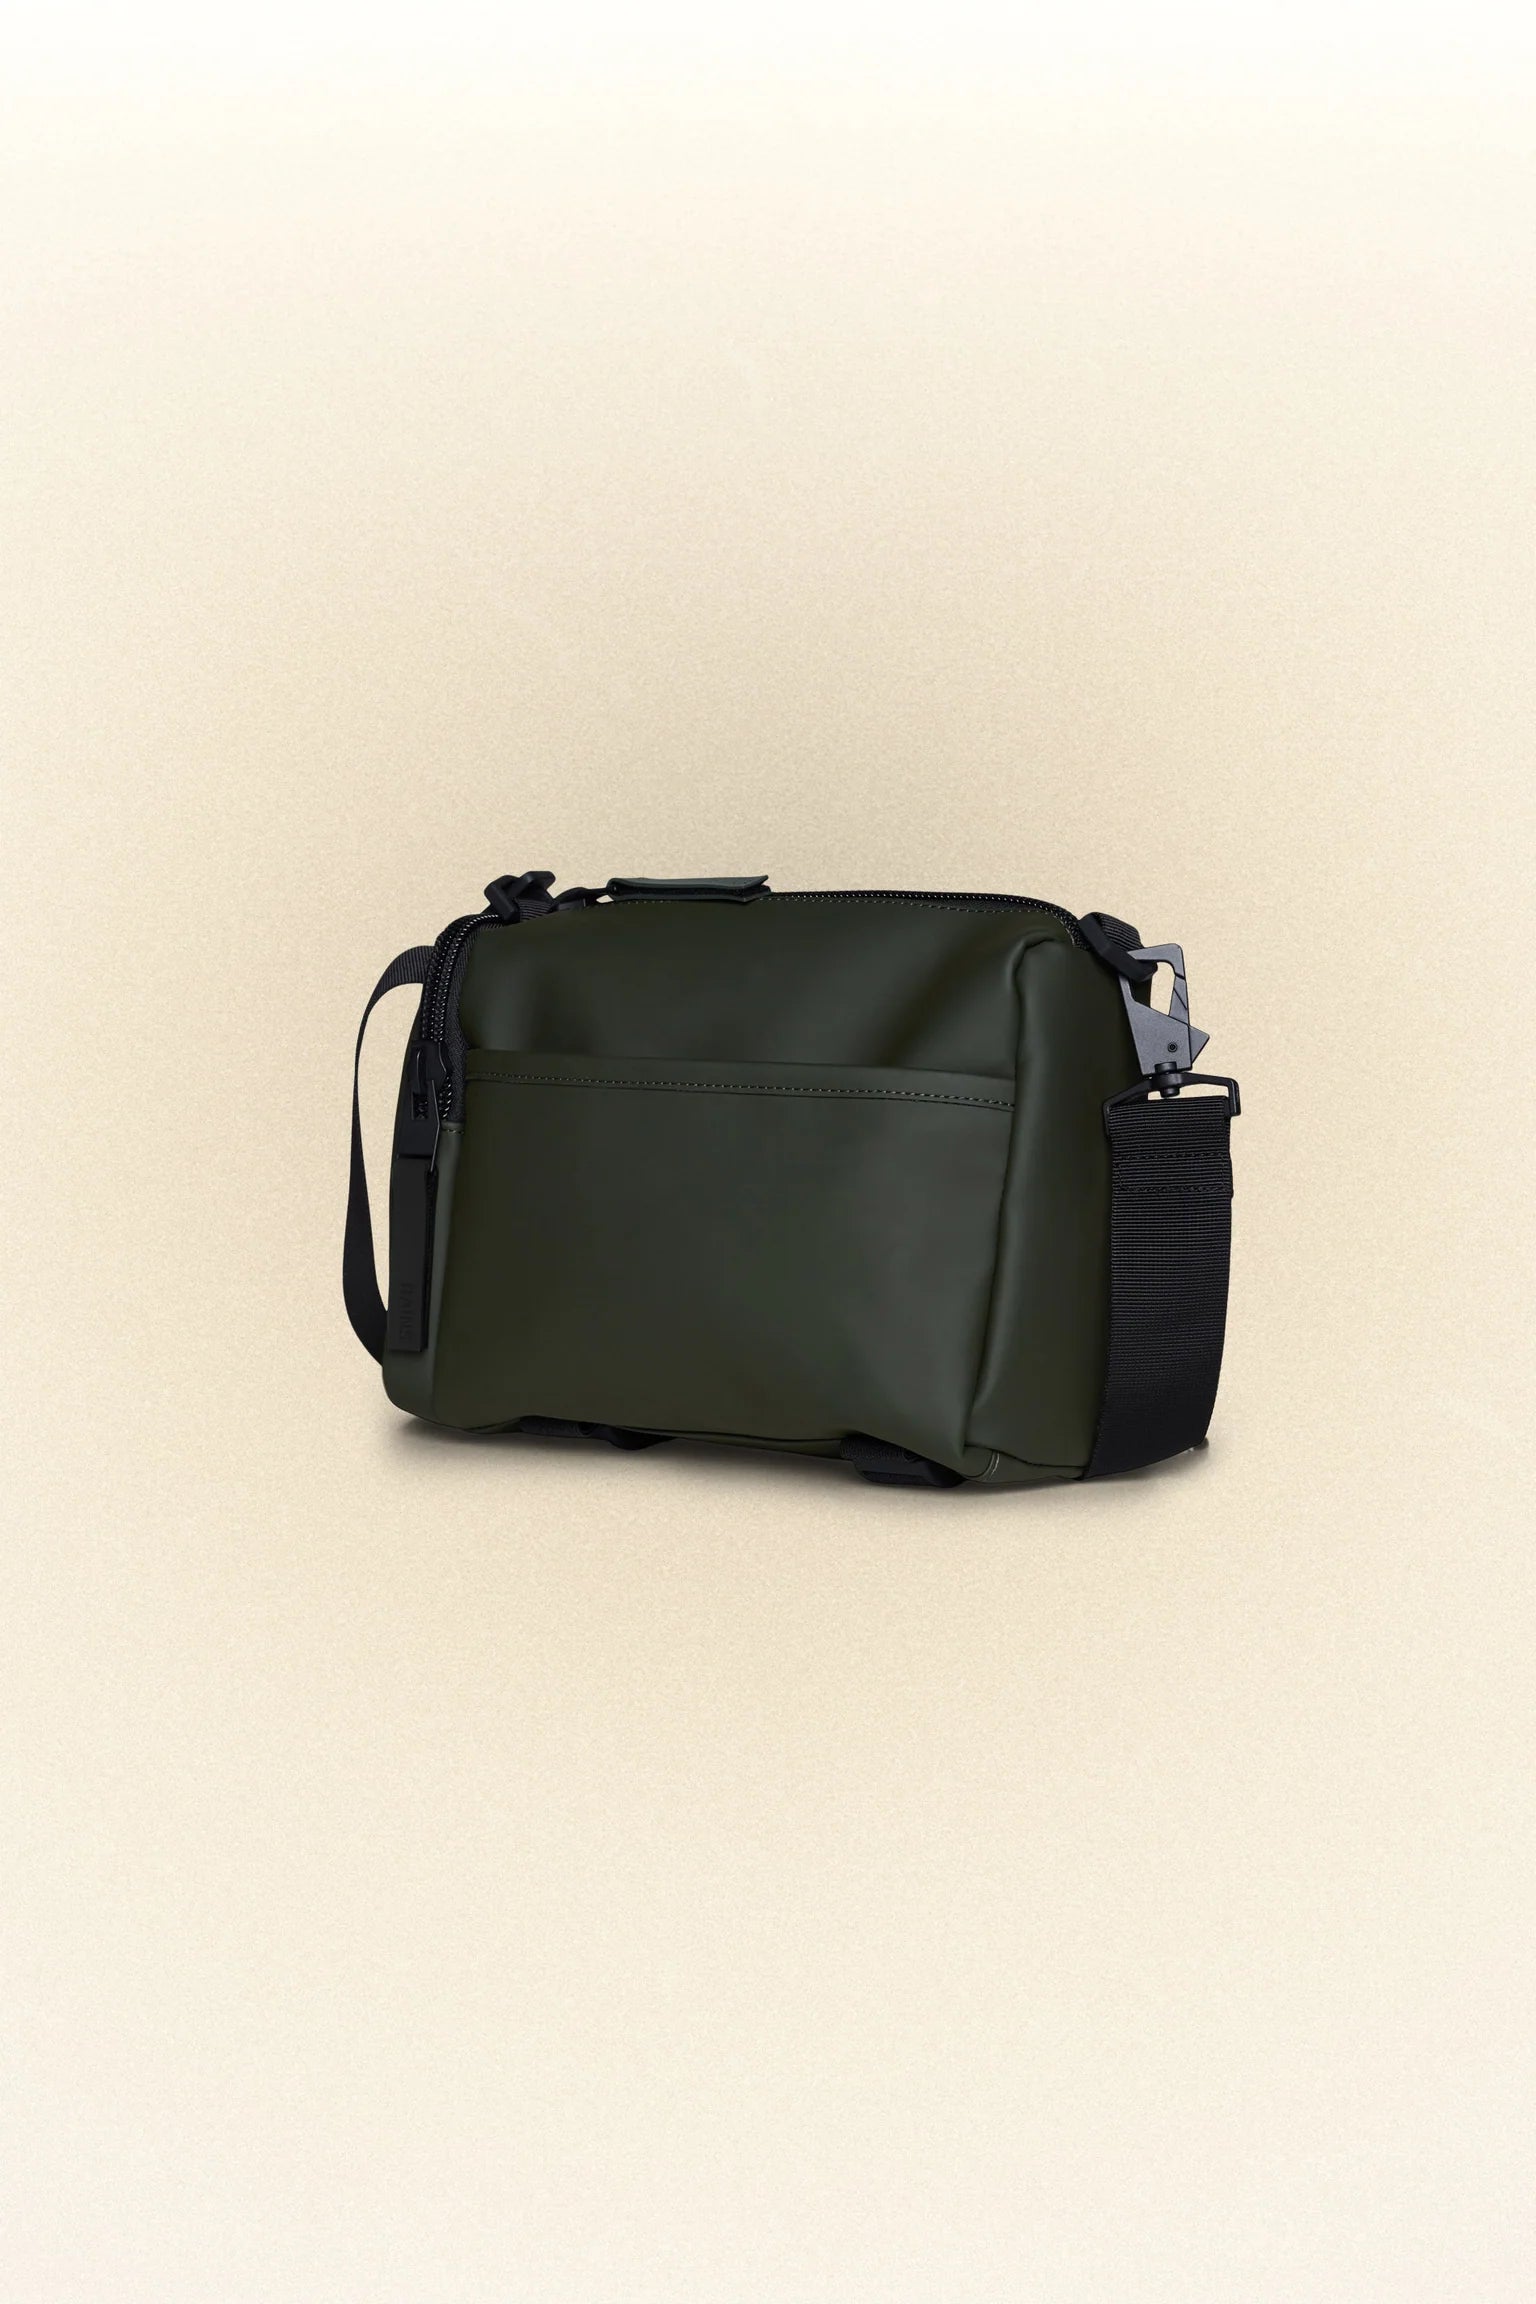 The Rains Texel crossbody bag, a small black bag with a handle, perfect for carrying daily essentials.